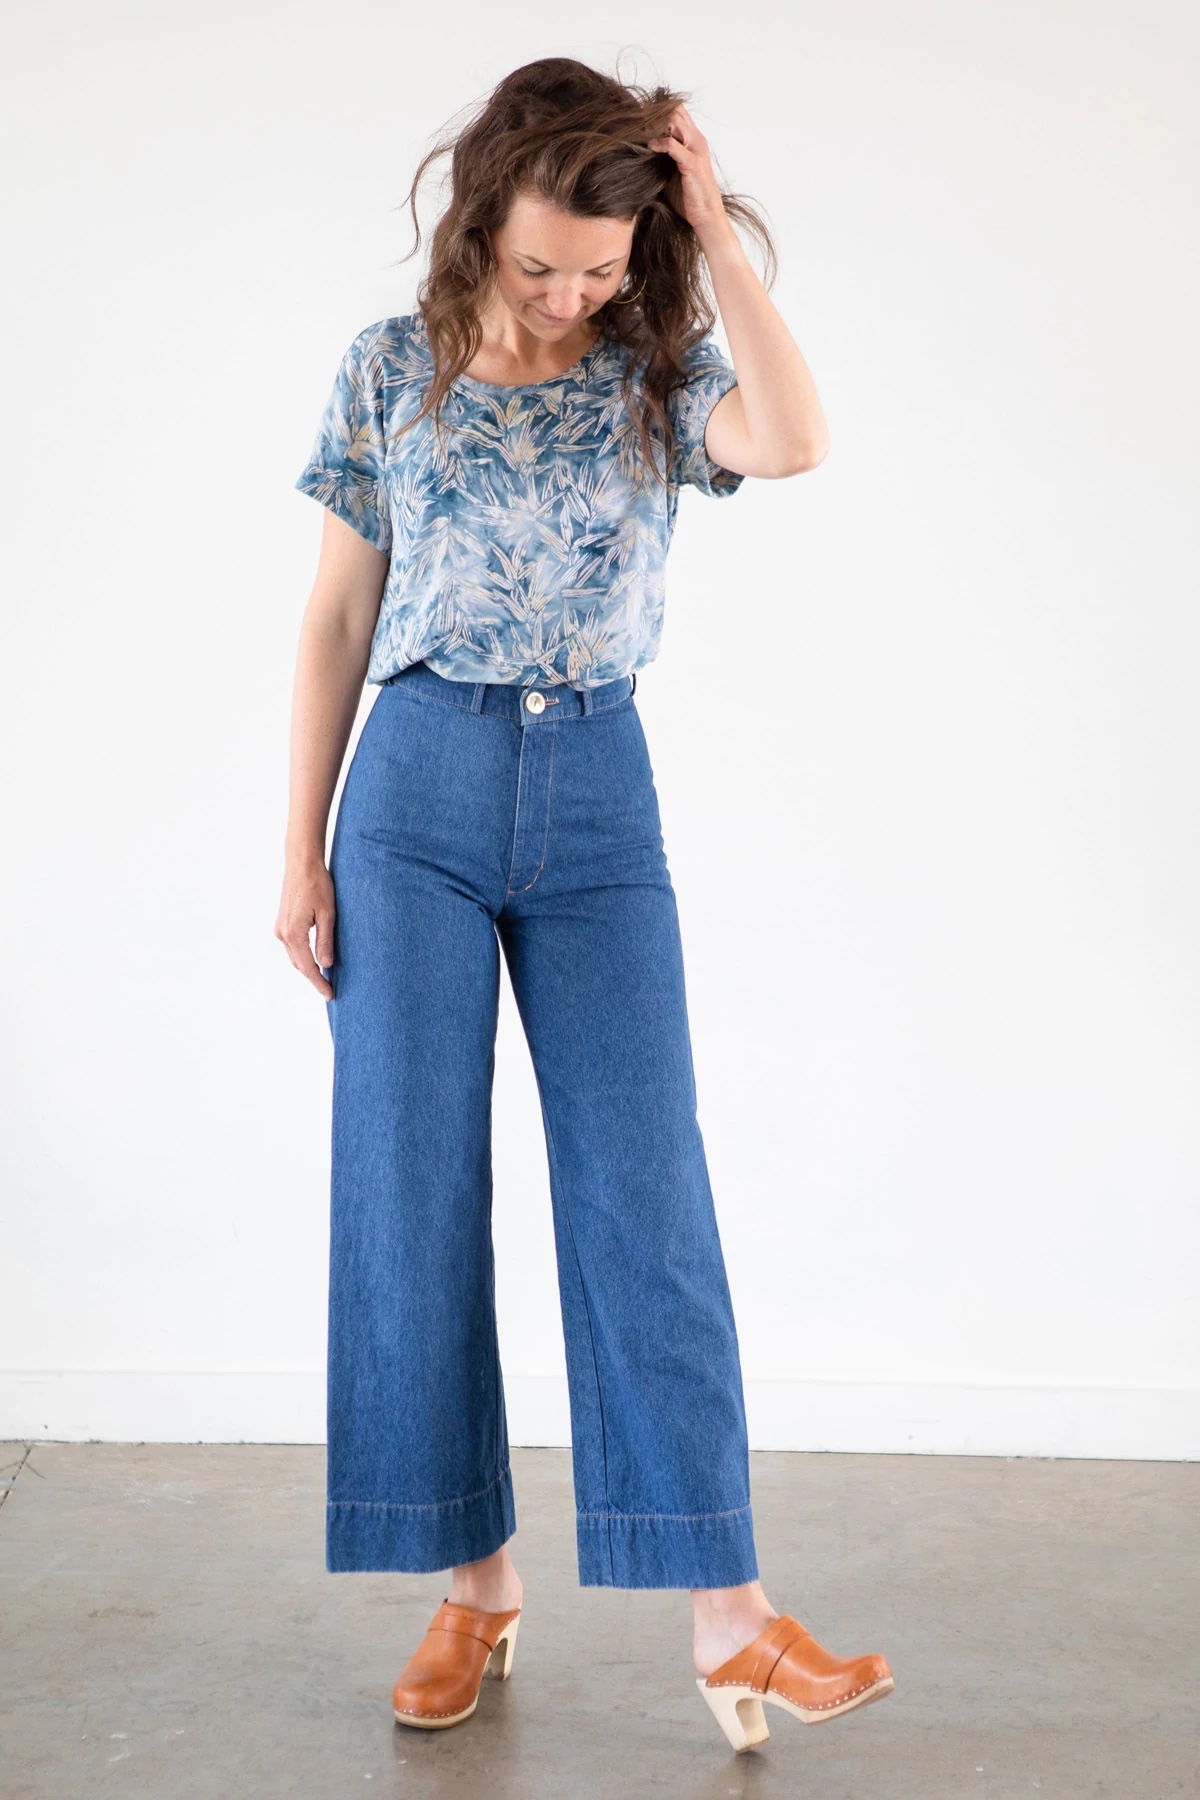 Woman wearing the Coram Top sewing pattern from Allie Olson on The Fold Line. A blouse pattern made in rayon/linen blends, rayon challis, tencel, crepe de chine or georgette fabrics, featuring a loose-fit, raglan sleeves, bust and shoulder darts, sleeve cuffs and curved dolphin hem.